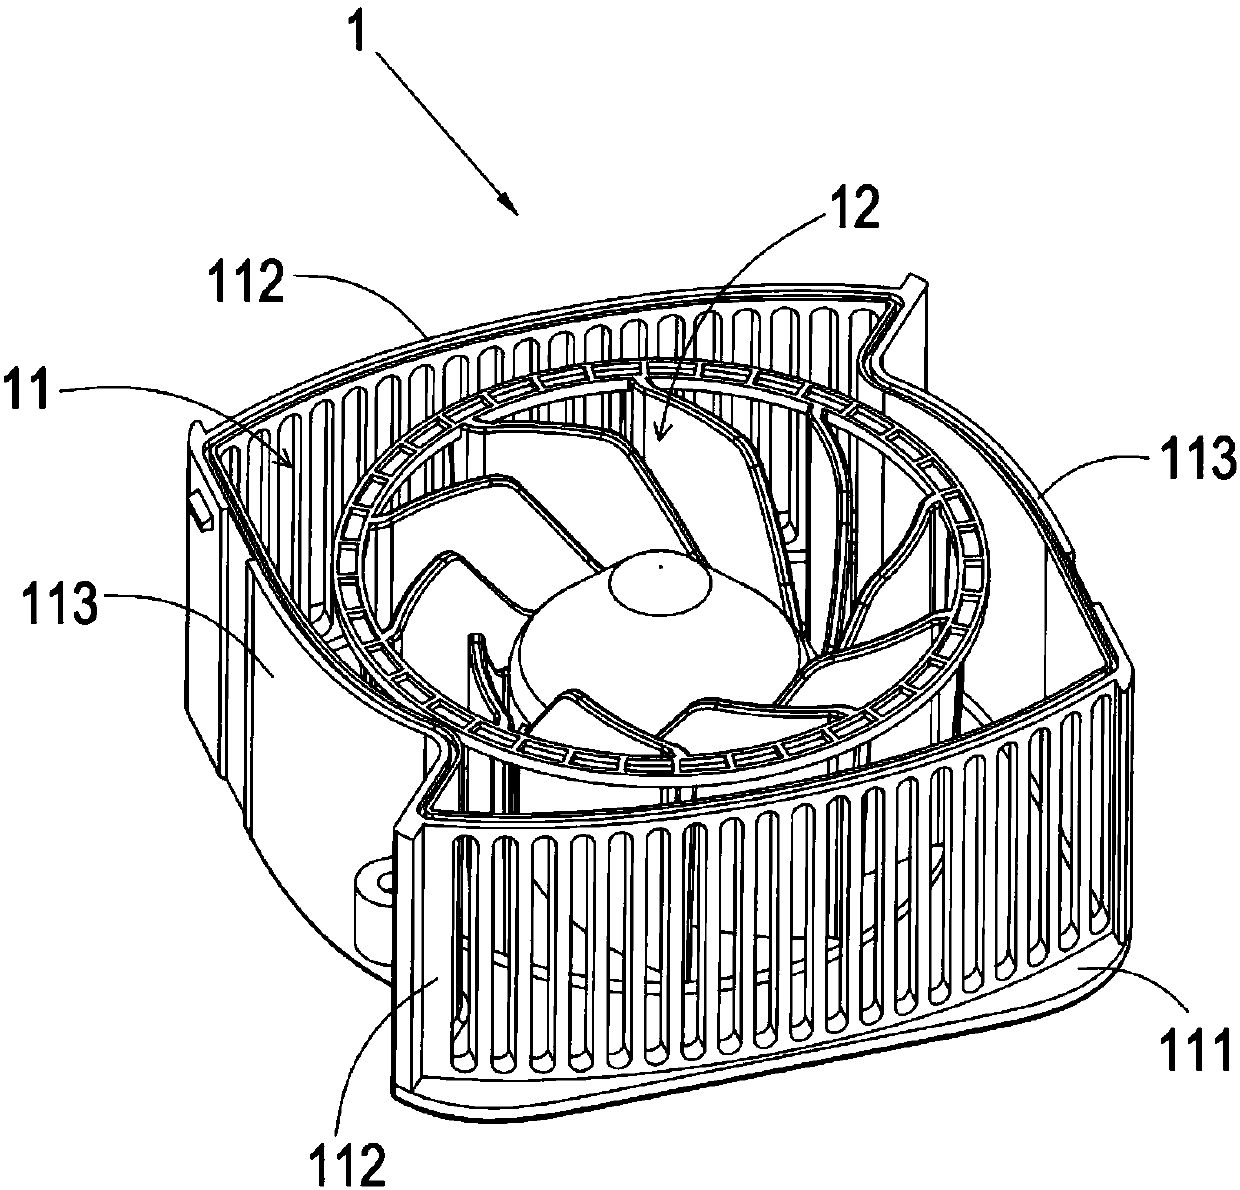 Centrifugal fan with impeller structure